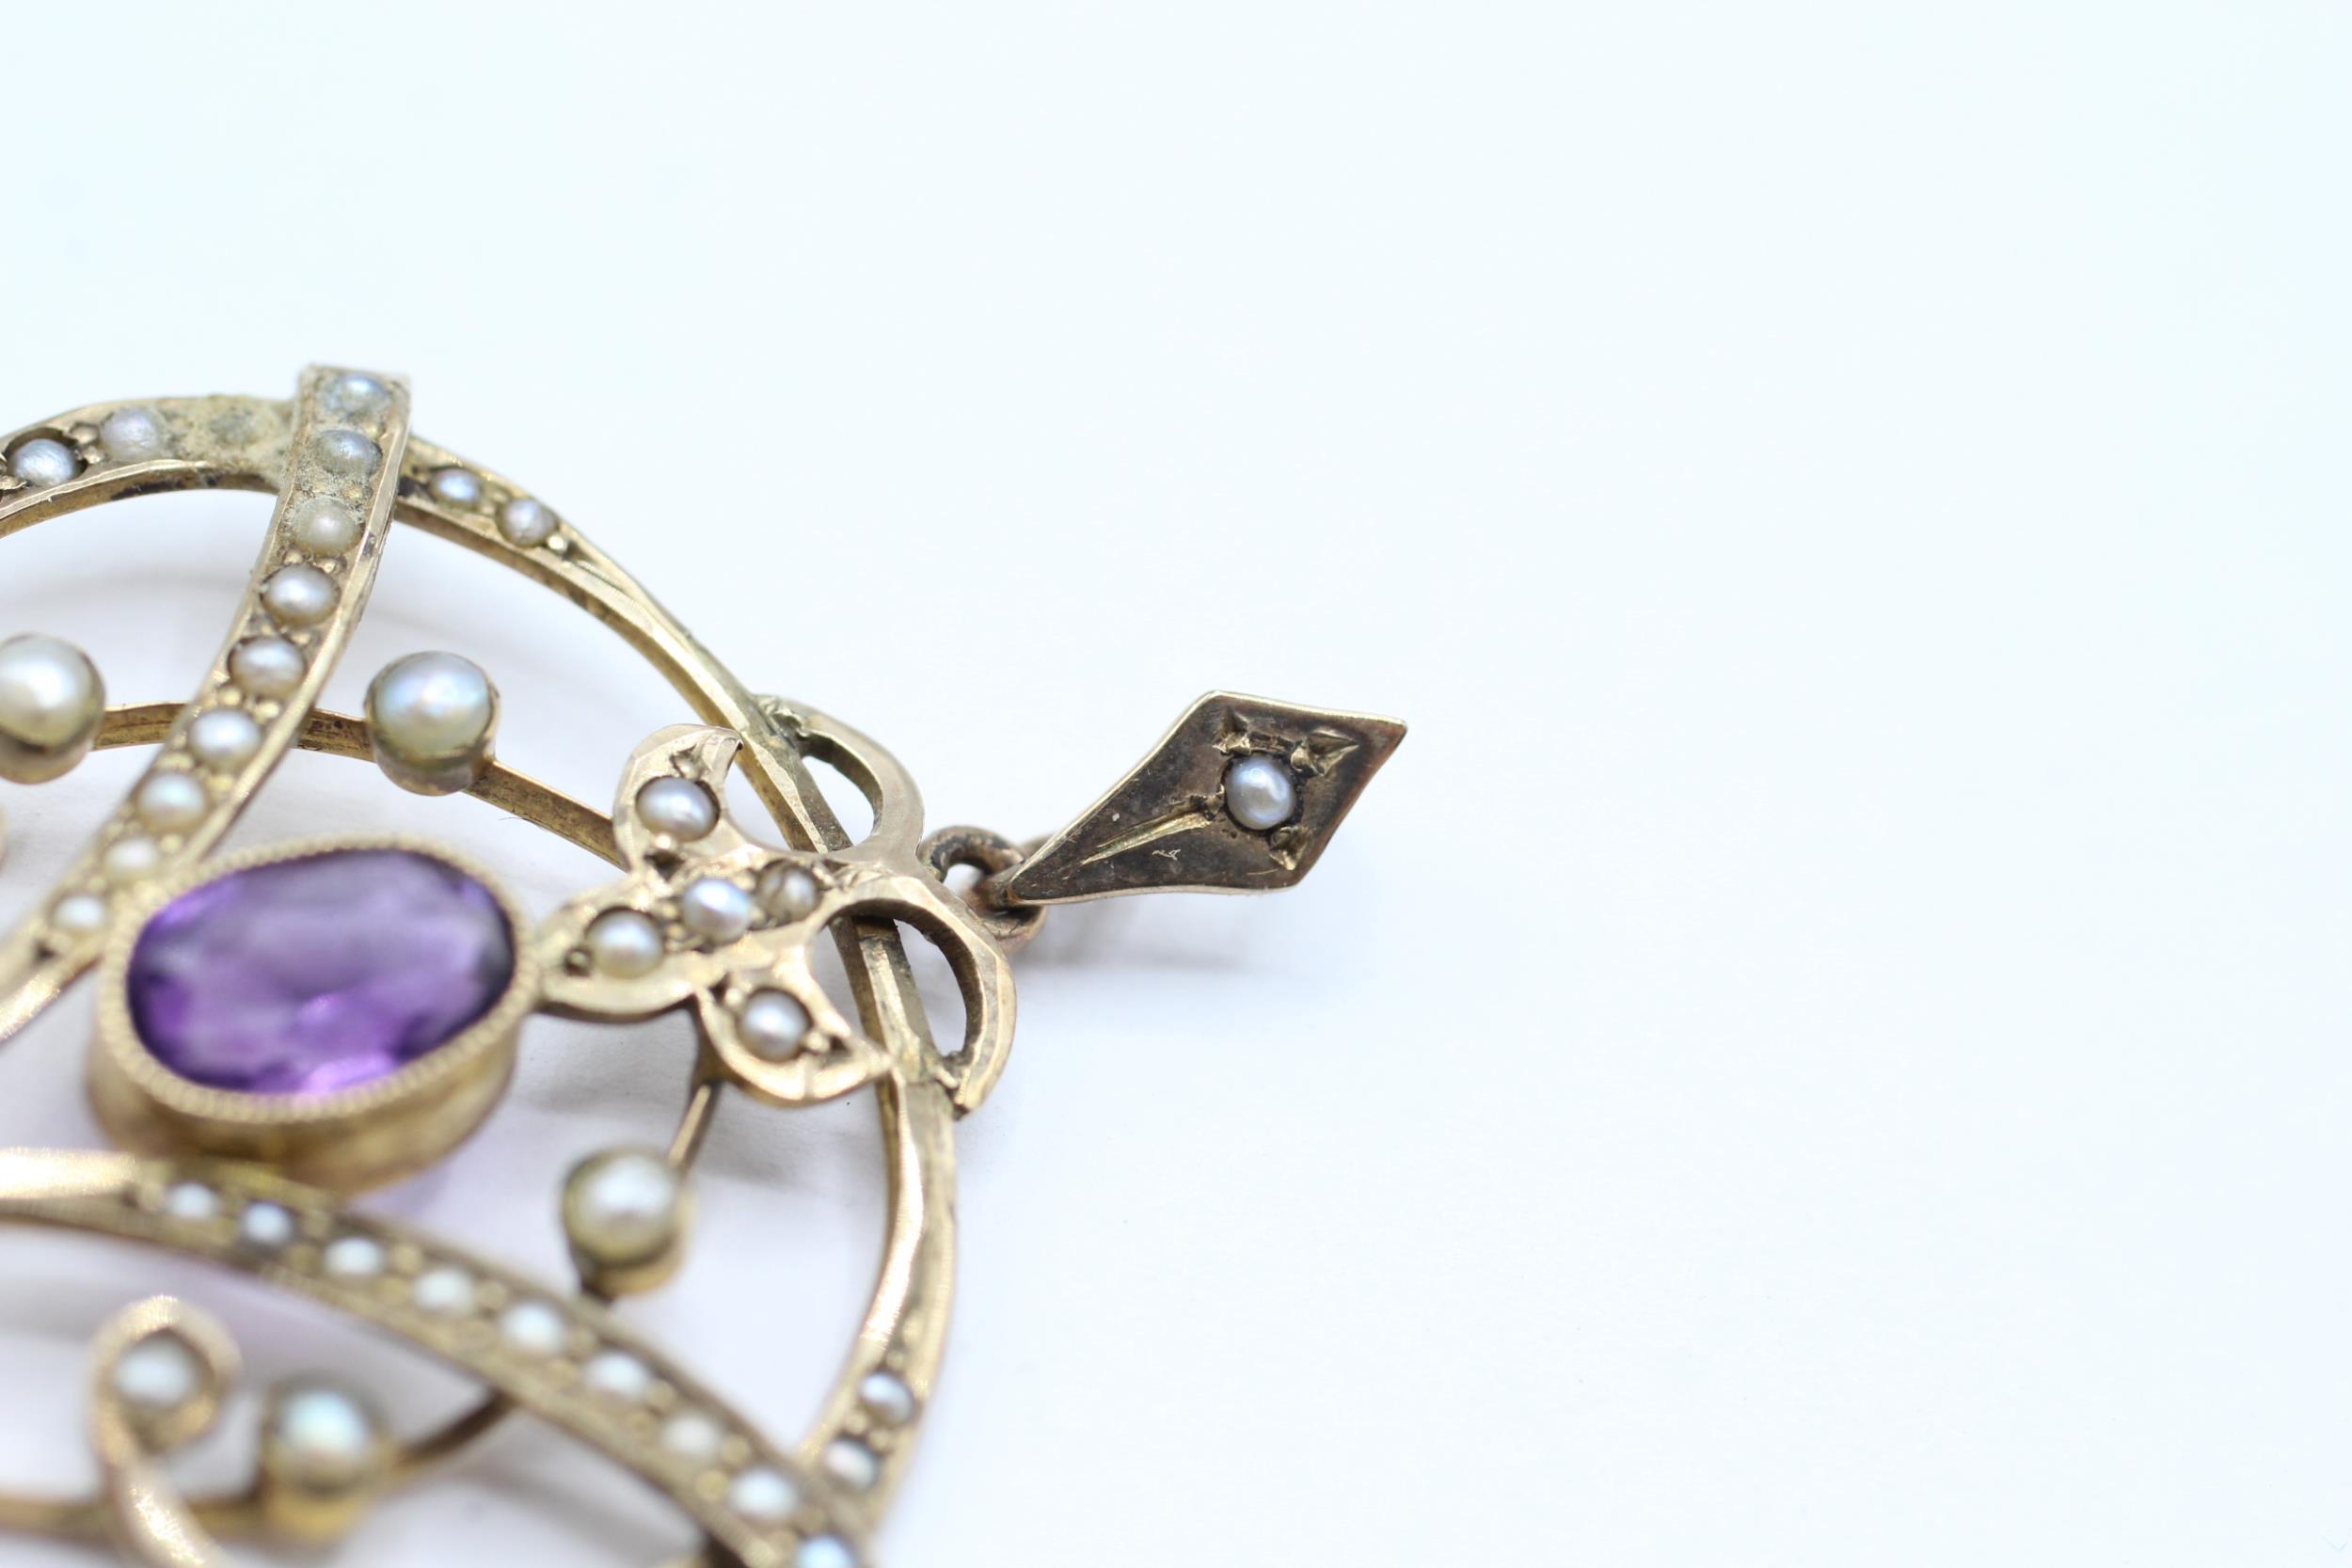 9ct gold Edwardian amethyst & seed pearl pendant with a drop cultured pearl 3.3 g - Image 4 of 5